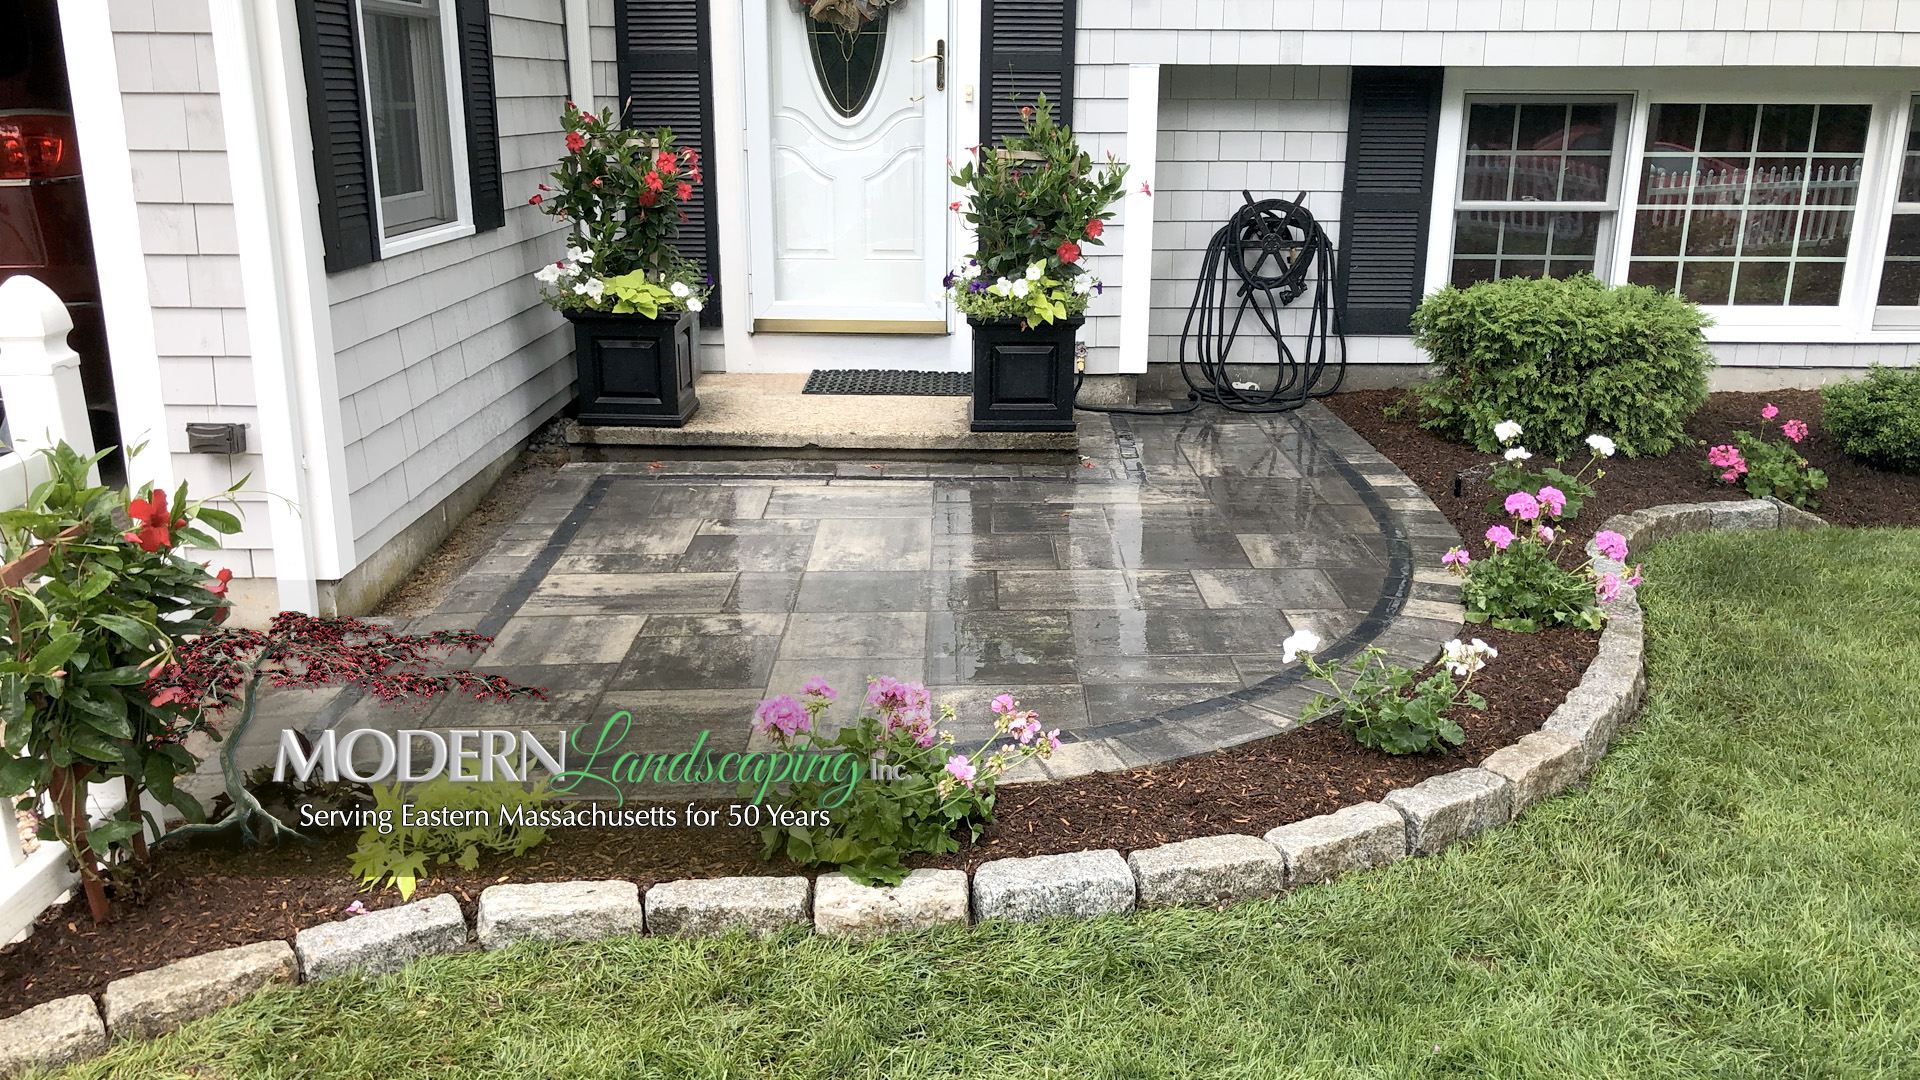 Landscaping contractors eastern Mass, Landscaping Easton, Pool contractors, Modern Landscaping Inc